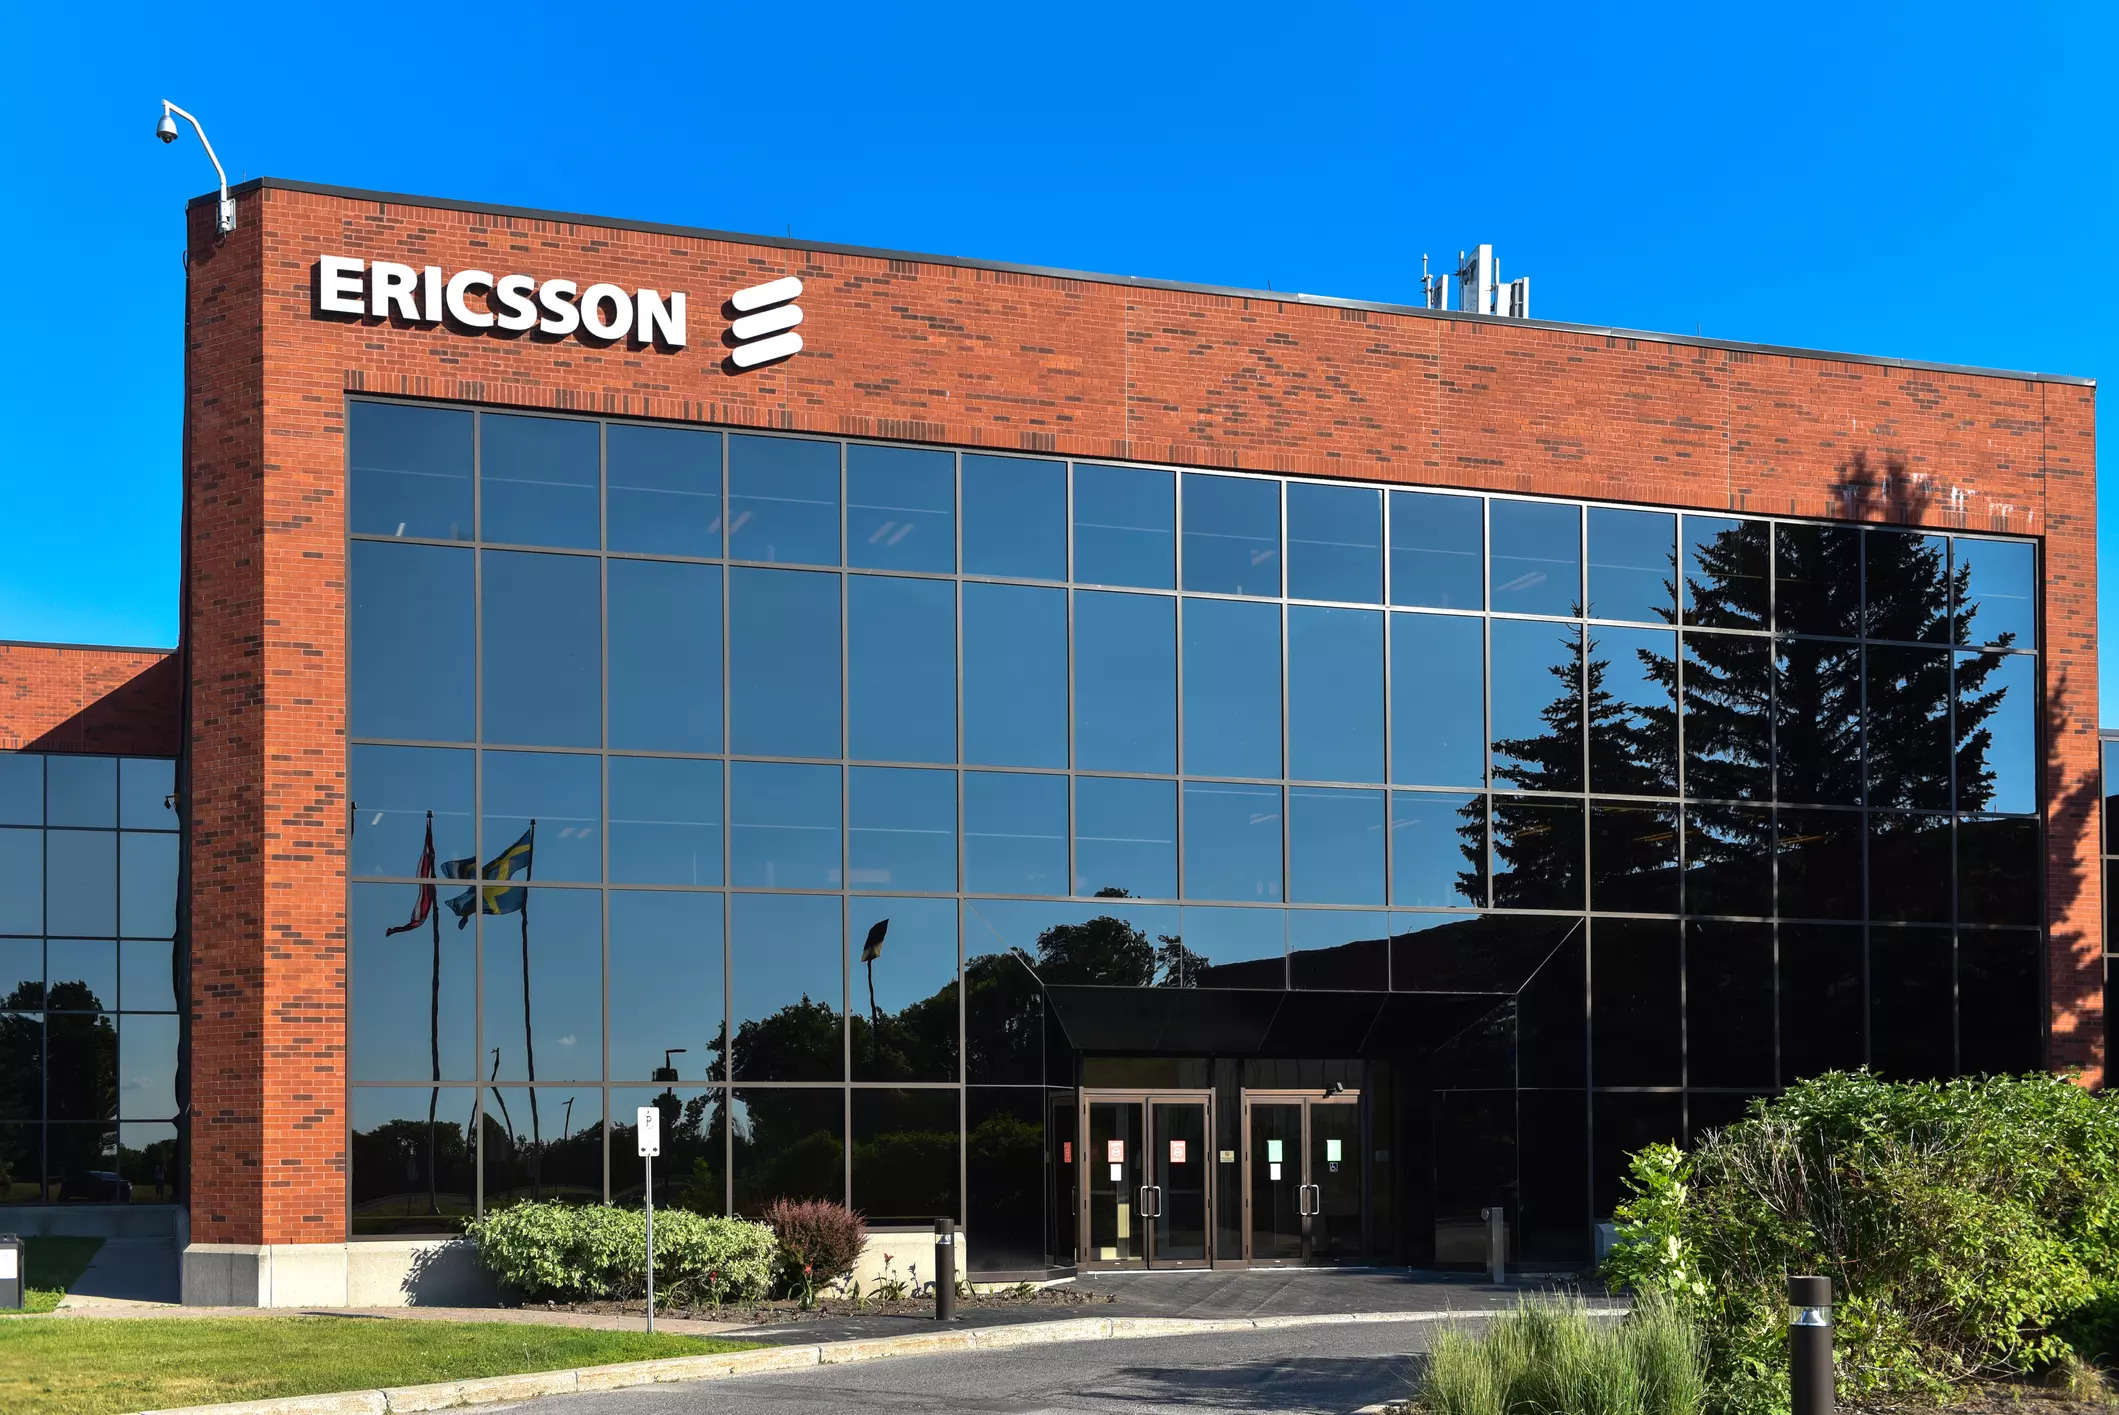 Ericsson to ramp up production via Jabil in India to serve 5G deployments, generate employment for 2,000 people